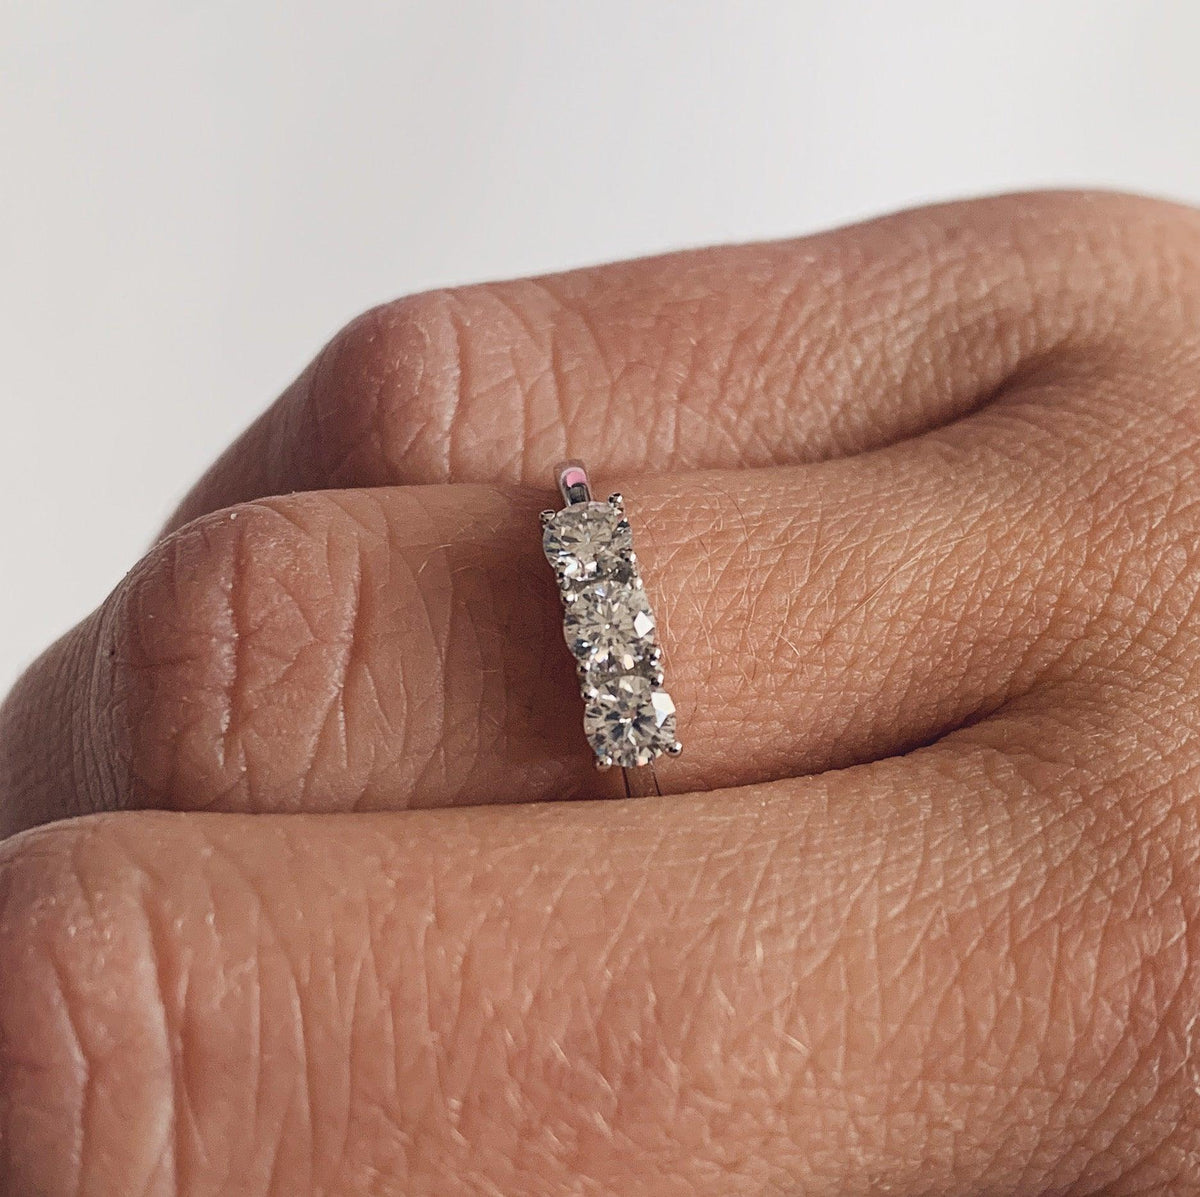 Moissanite White Gold Ring On A Woman's Hand